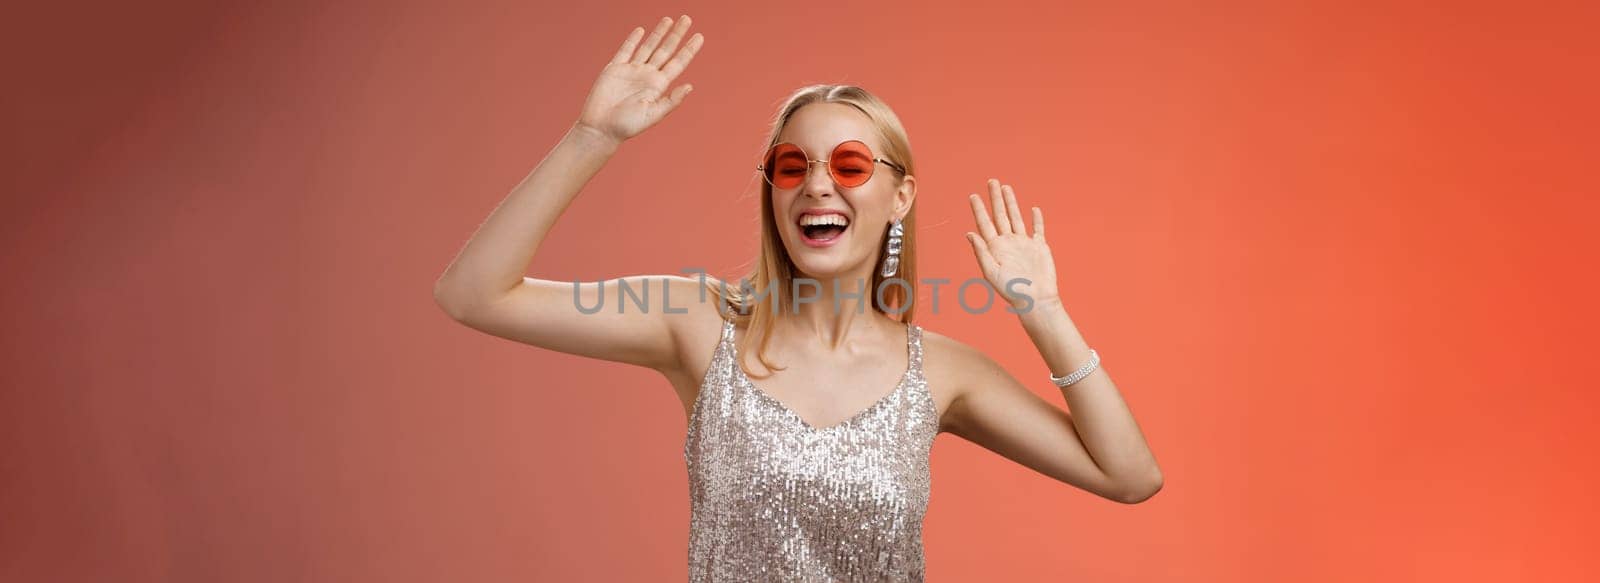 Happy amused carefree blond woman go wild dance-floor dancing having fun yelling yeah closed eyes waving hands moving rhythm music joyfully party in silver stylish dress sunglasses, red background.